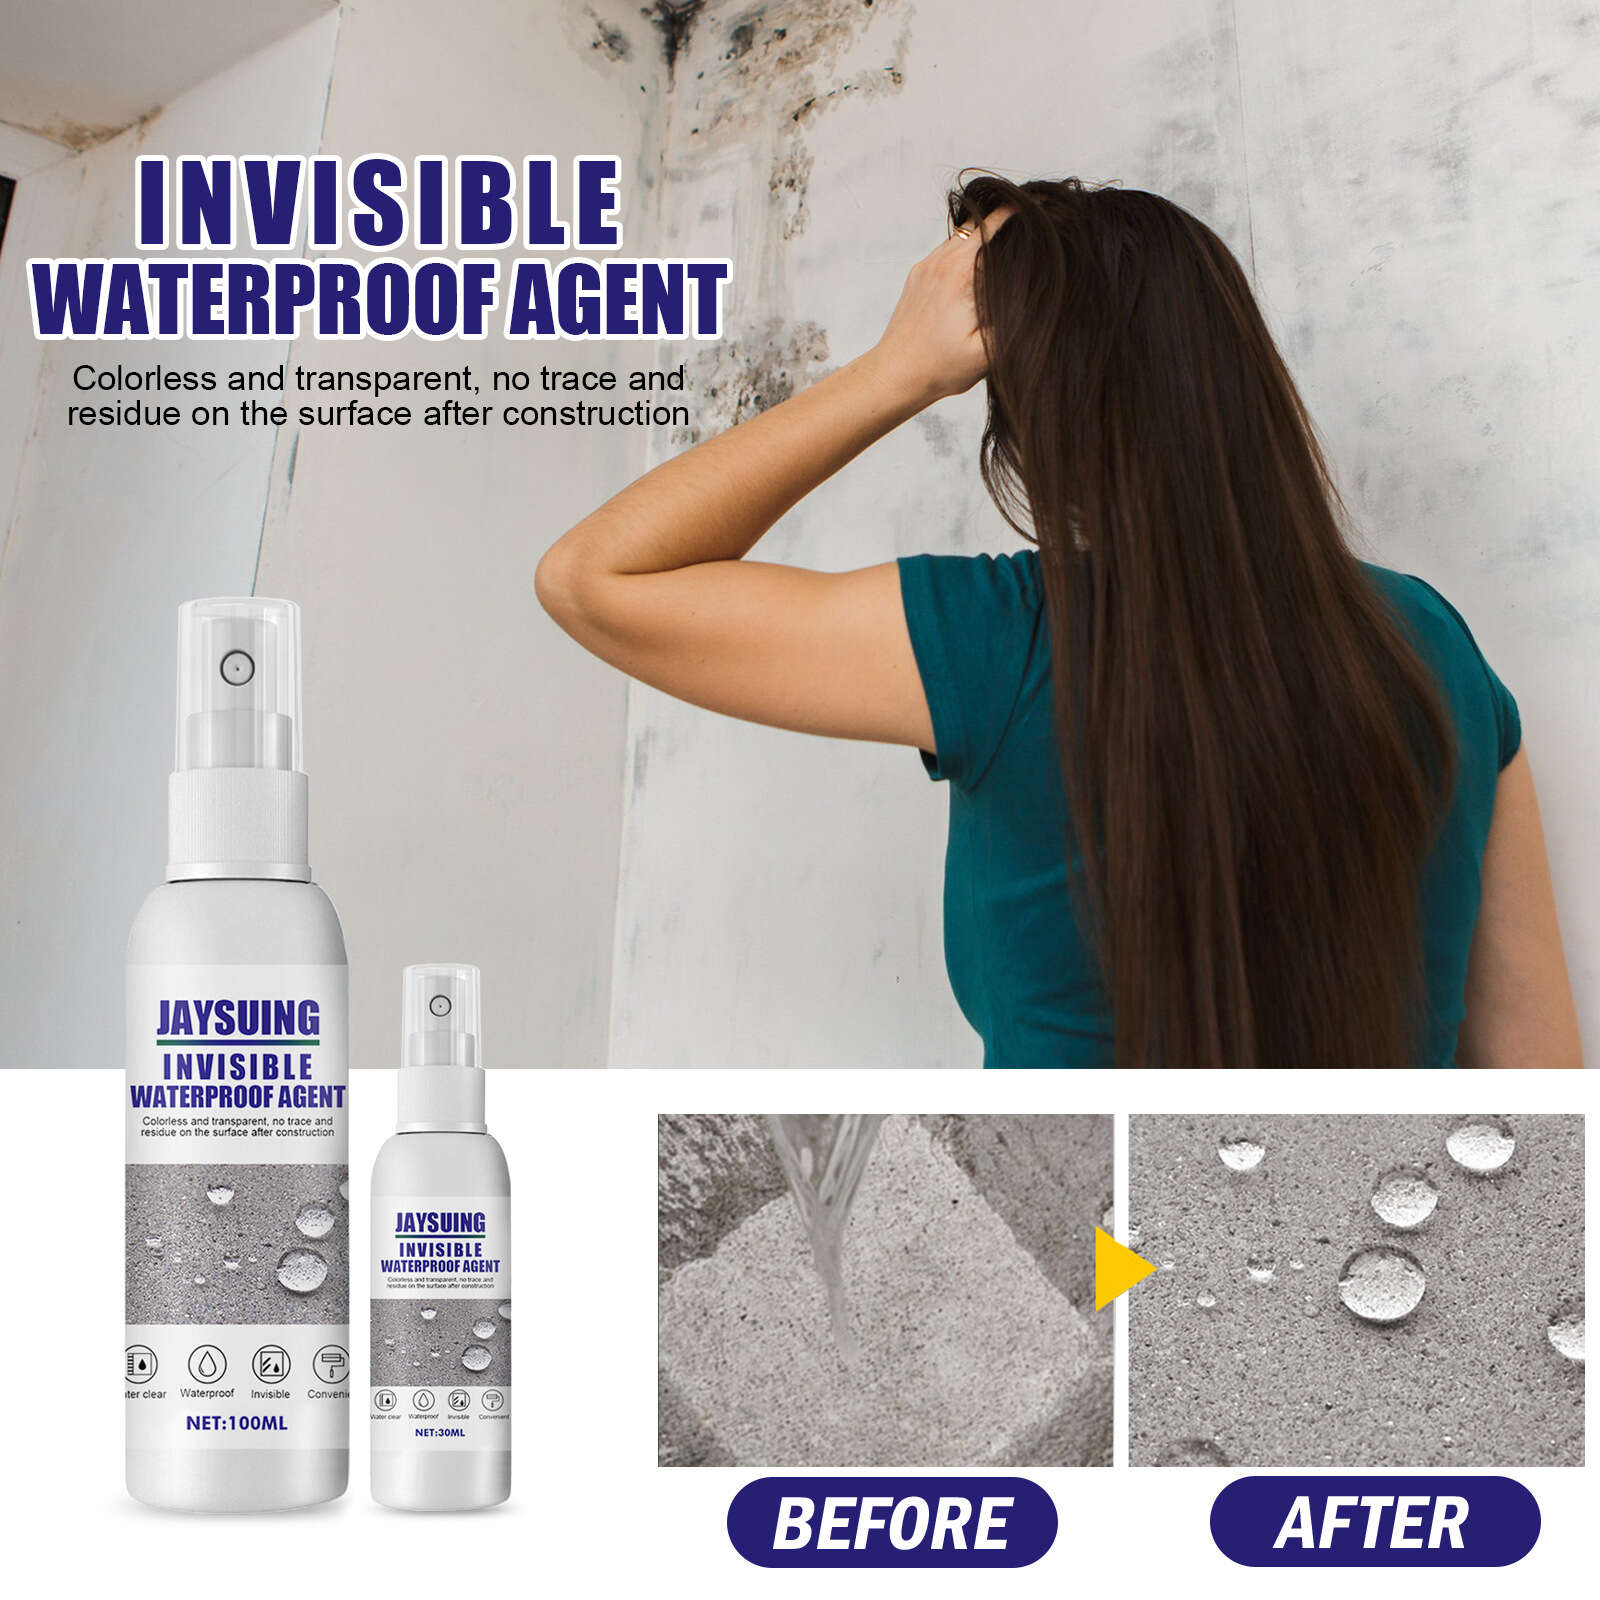 Jaysuing Invisible Waterproof Agent Spray